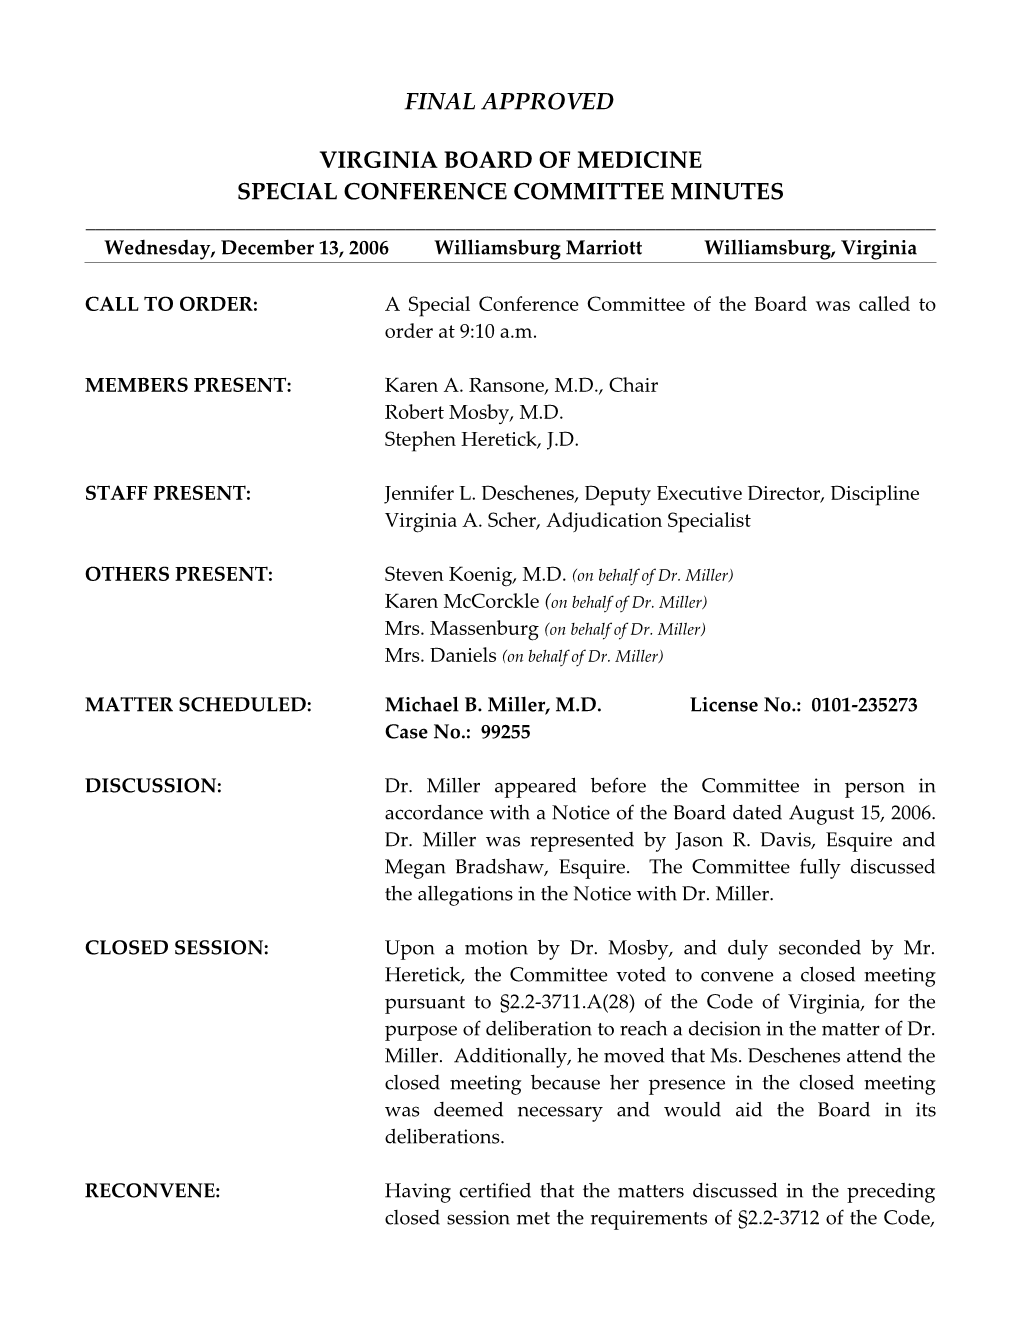 Special Conference Committee Minutes